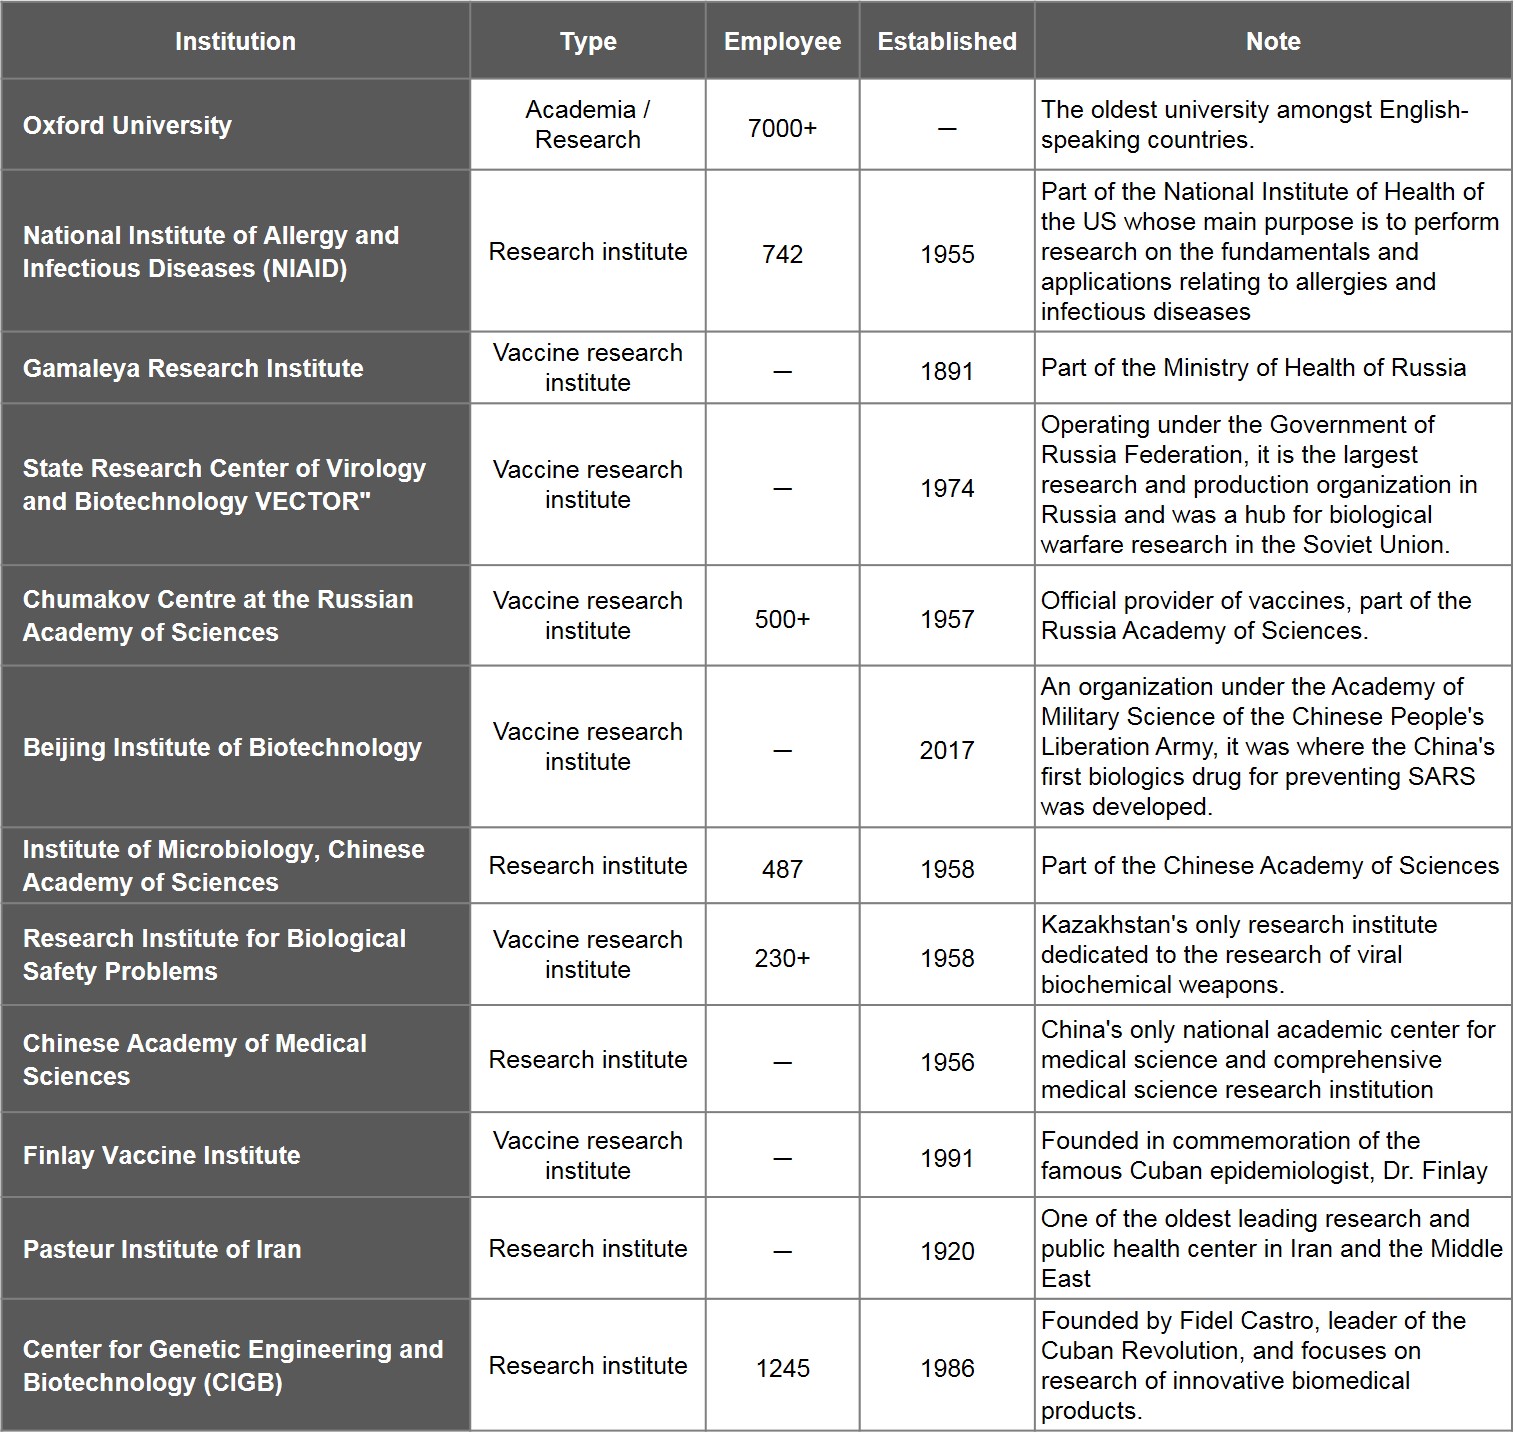 List of Leading Research Institutes for Vaccine Development